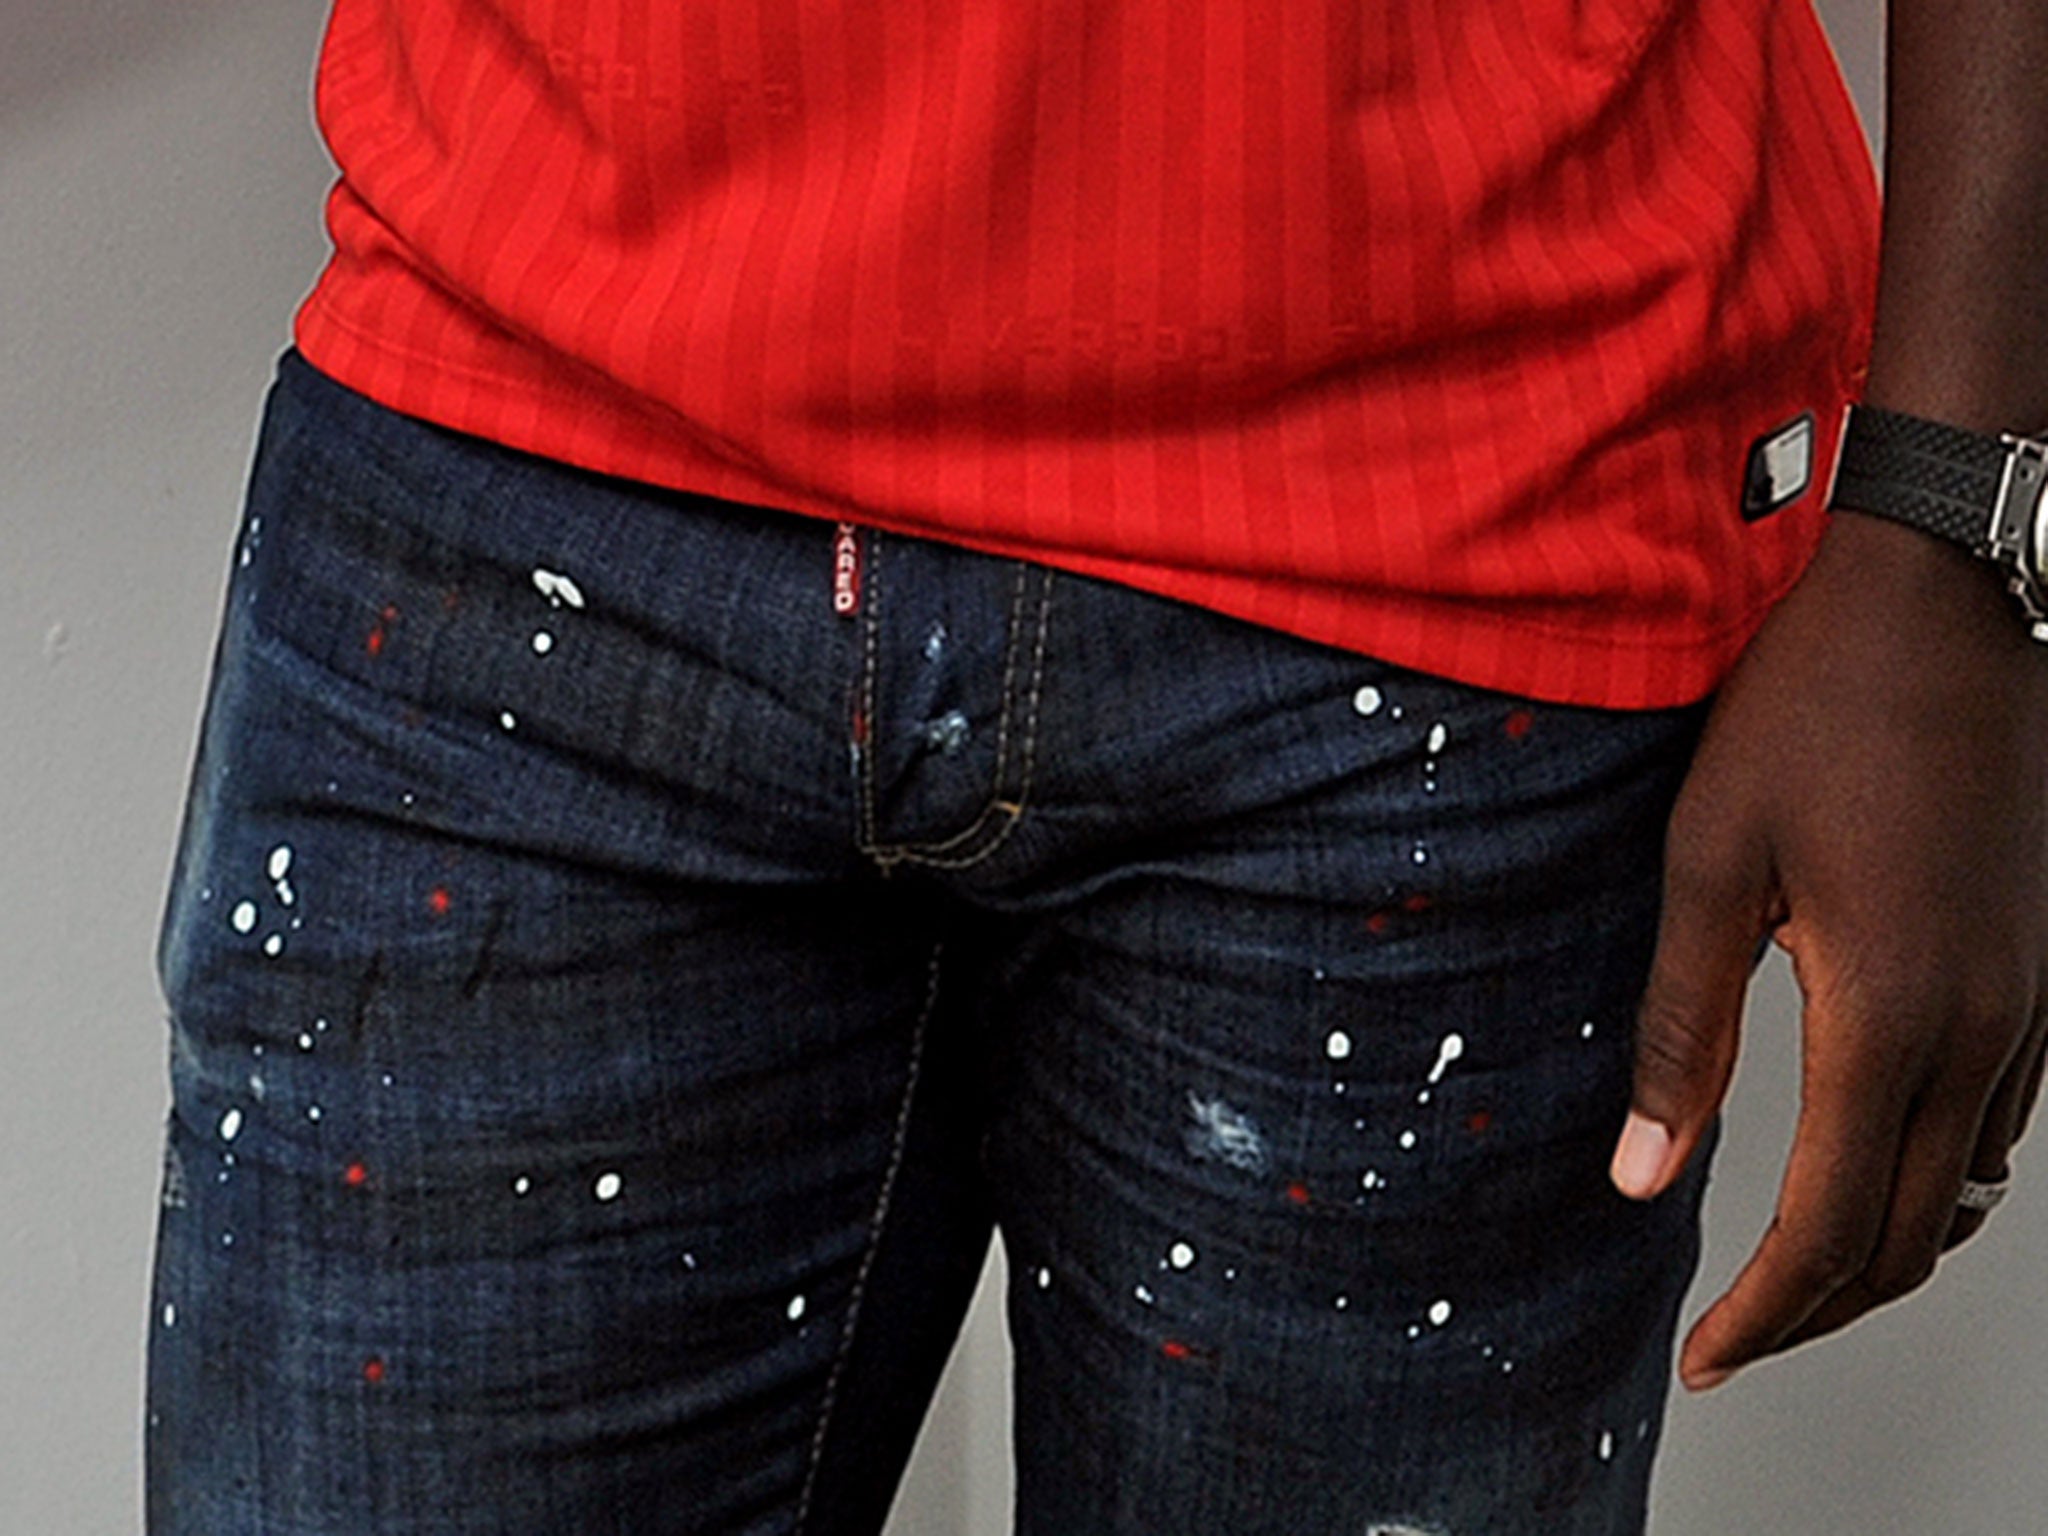 A close up of Christian Benteke's trousers